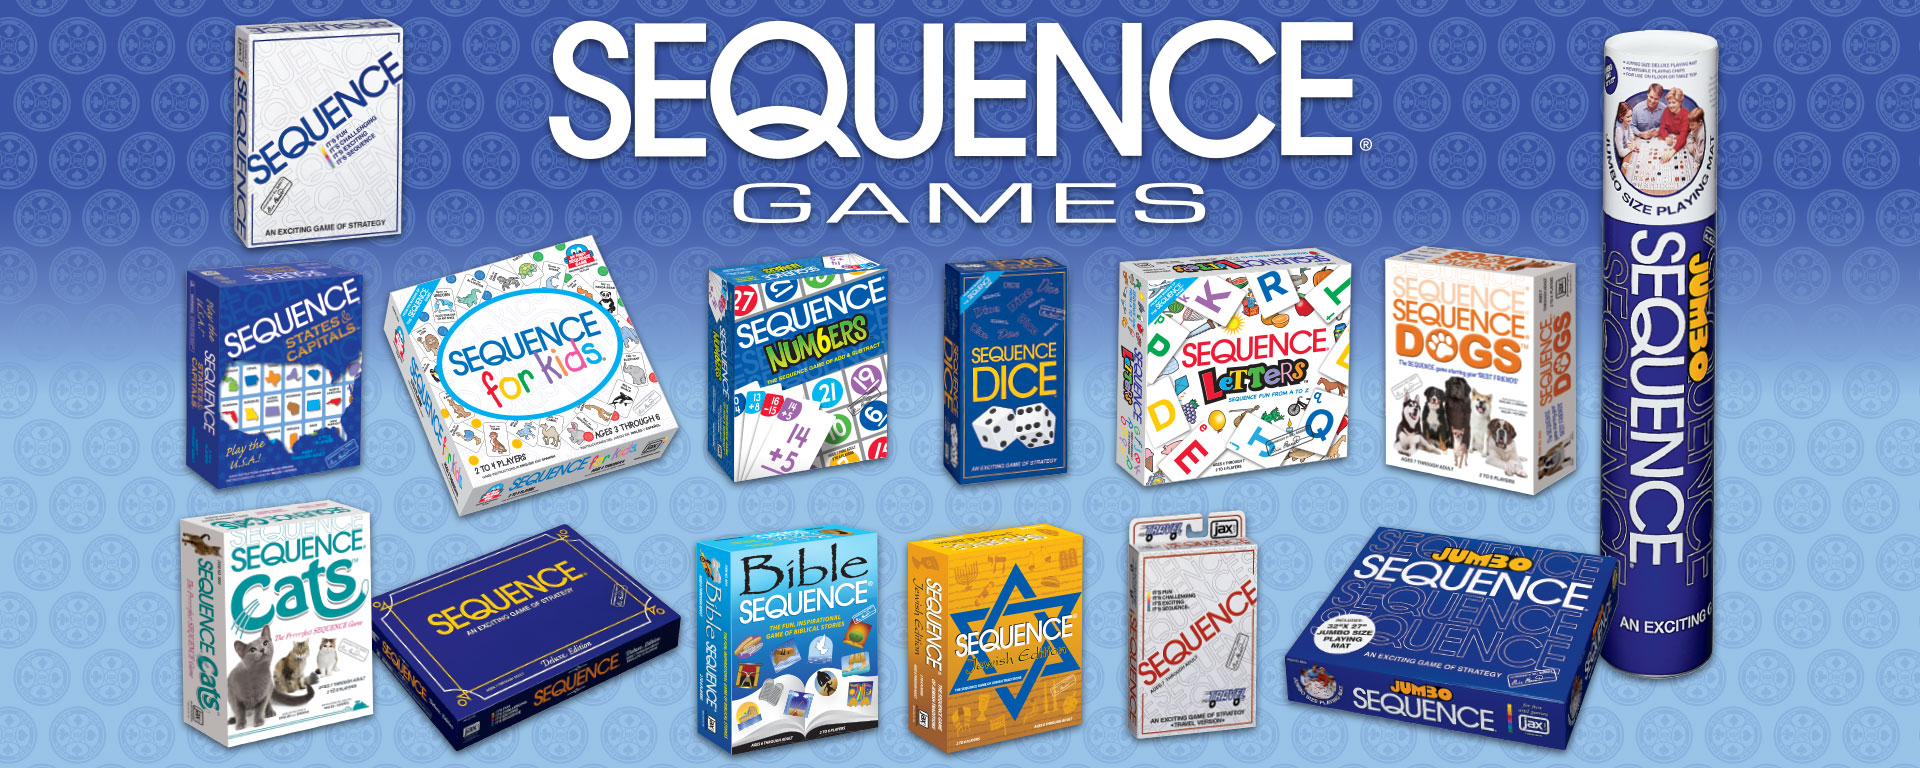 sequence game online app